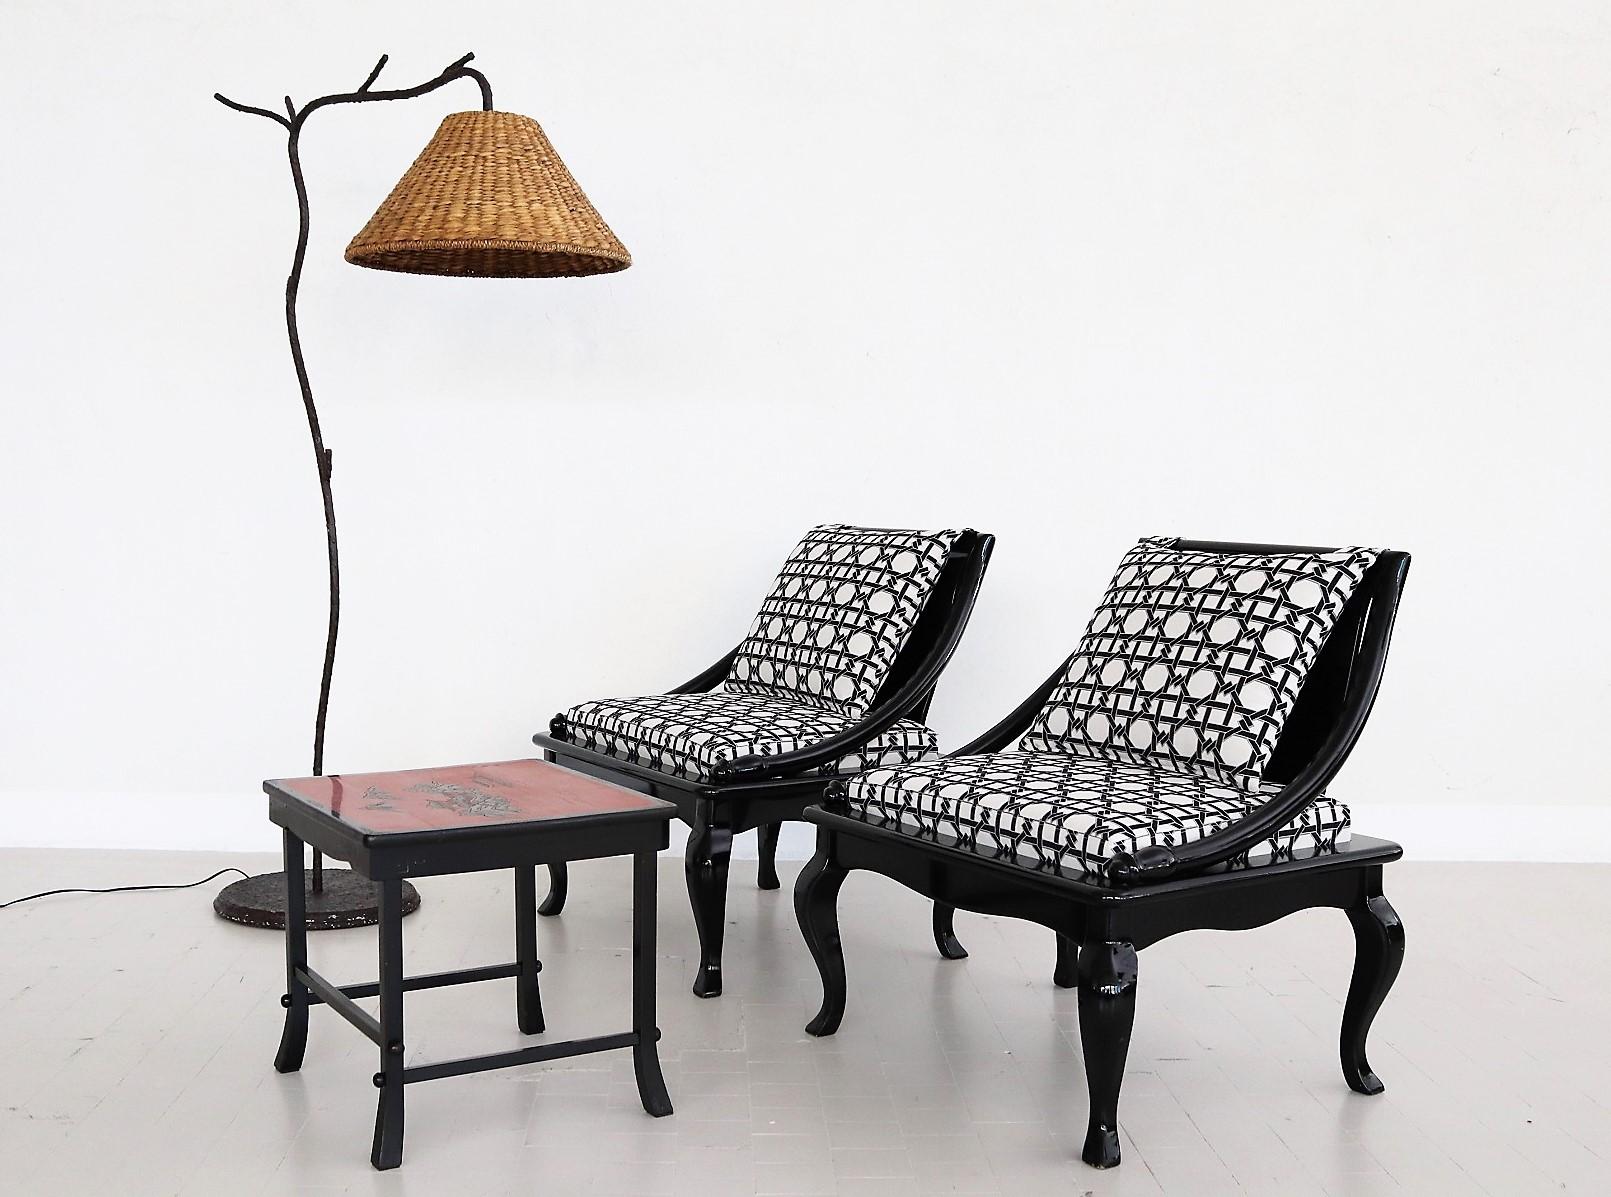 Beautiful set of two low chairs or side chairs made of lacquered wood in the Asian, oriental style.
The seat cushion, which is easily detachable, has a wooden base and is very stable.
The seat cushion and the back cushion, which is attached to the